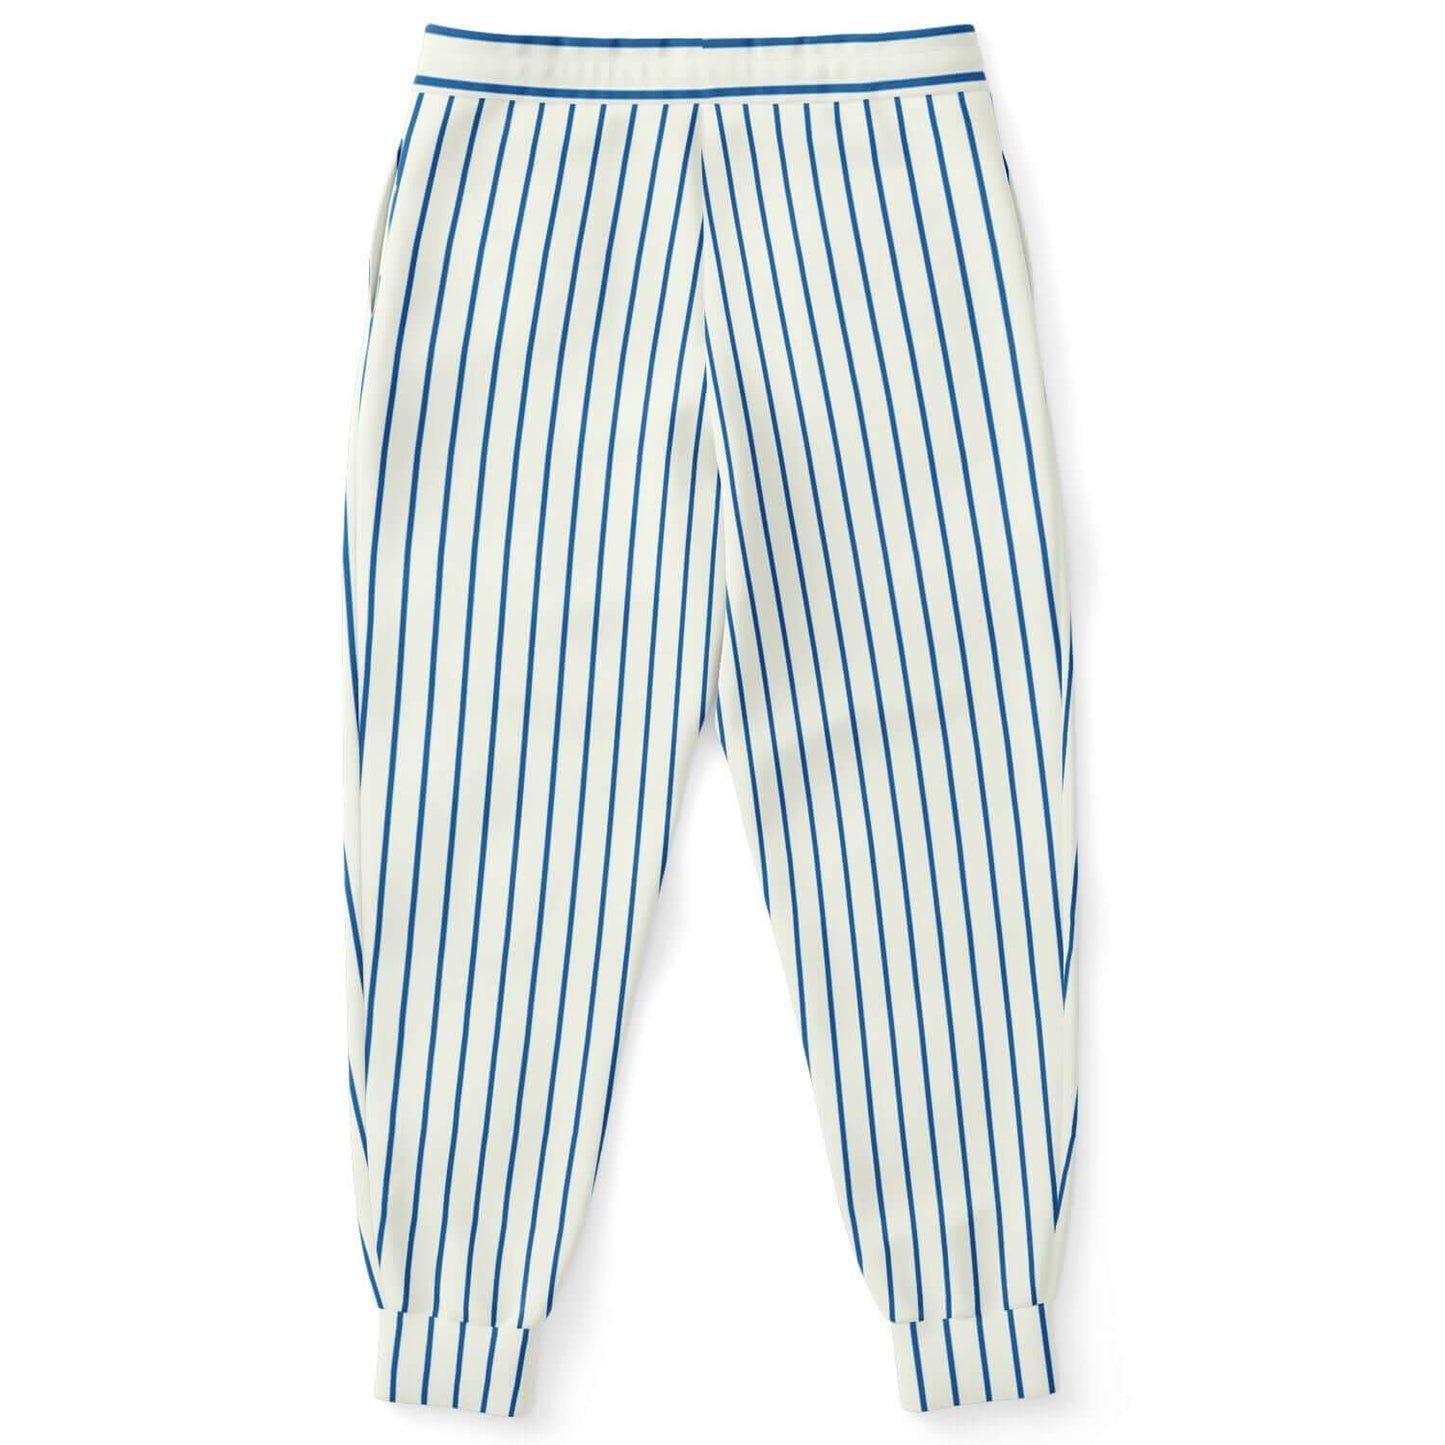 Unisex Track Pants | Thin Blue Lines | White HD